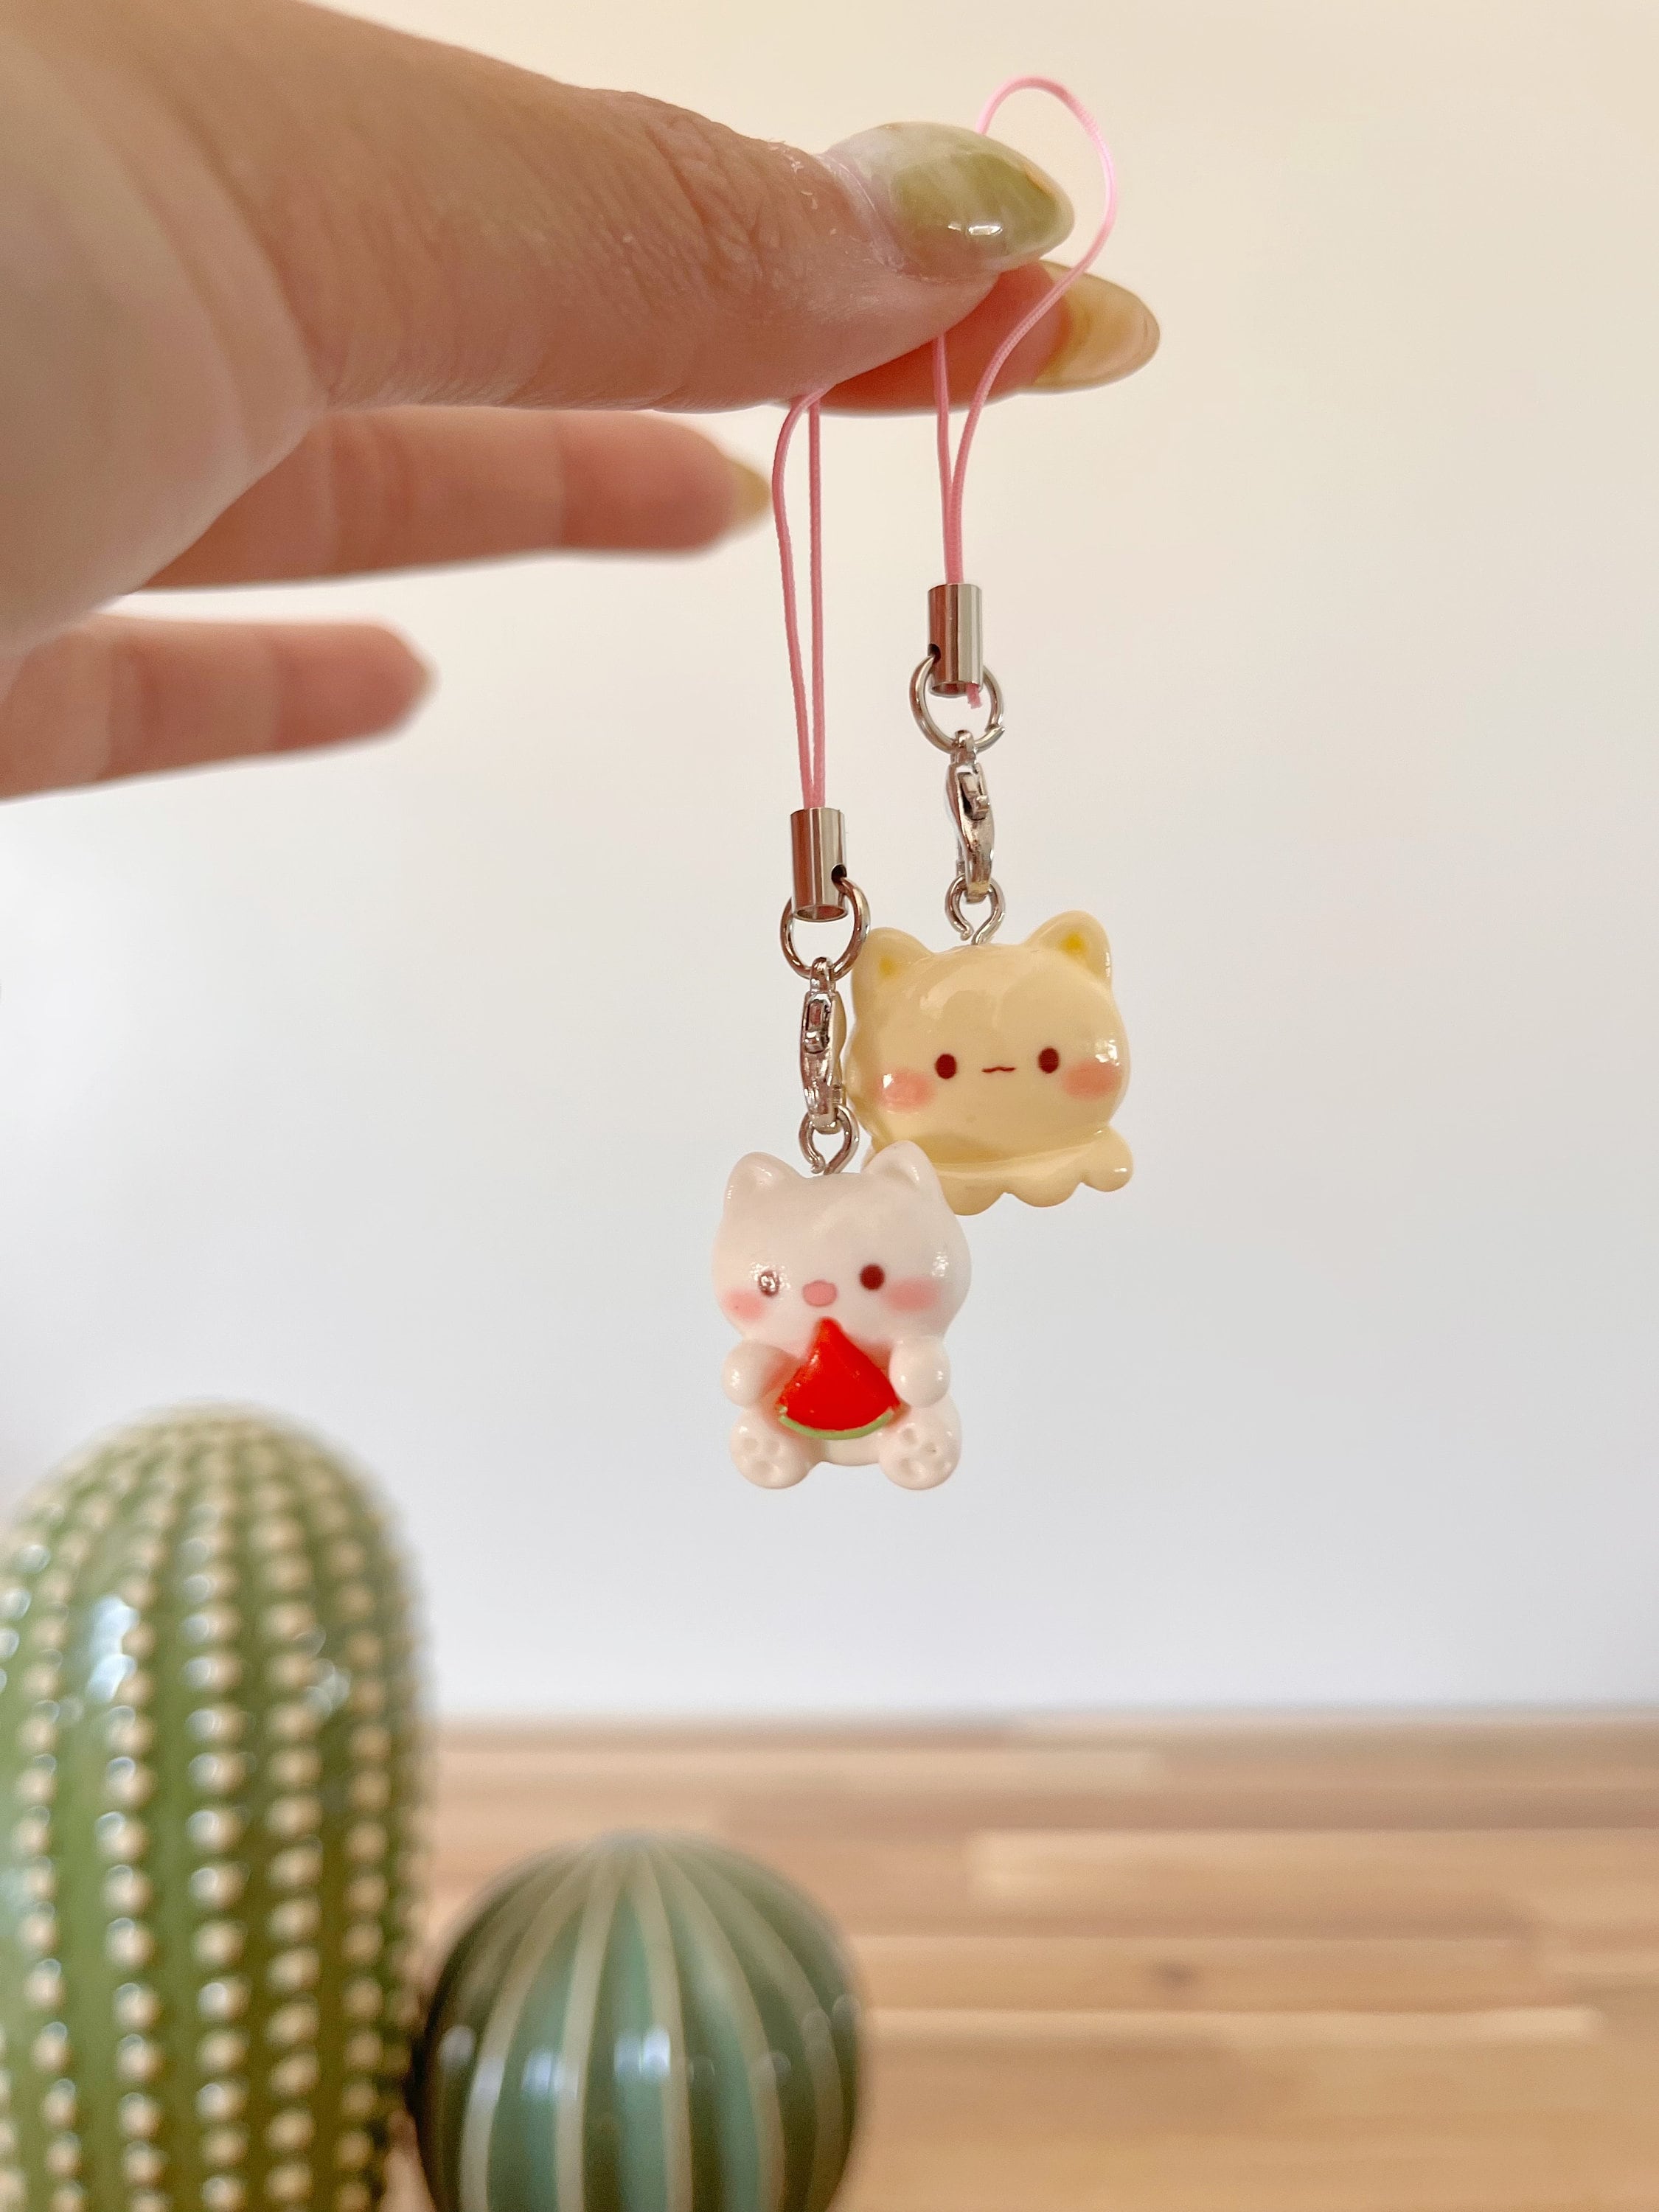 Kawaii Cat charms pendants for jewelry making bracelets necklace